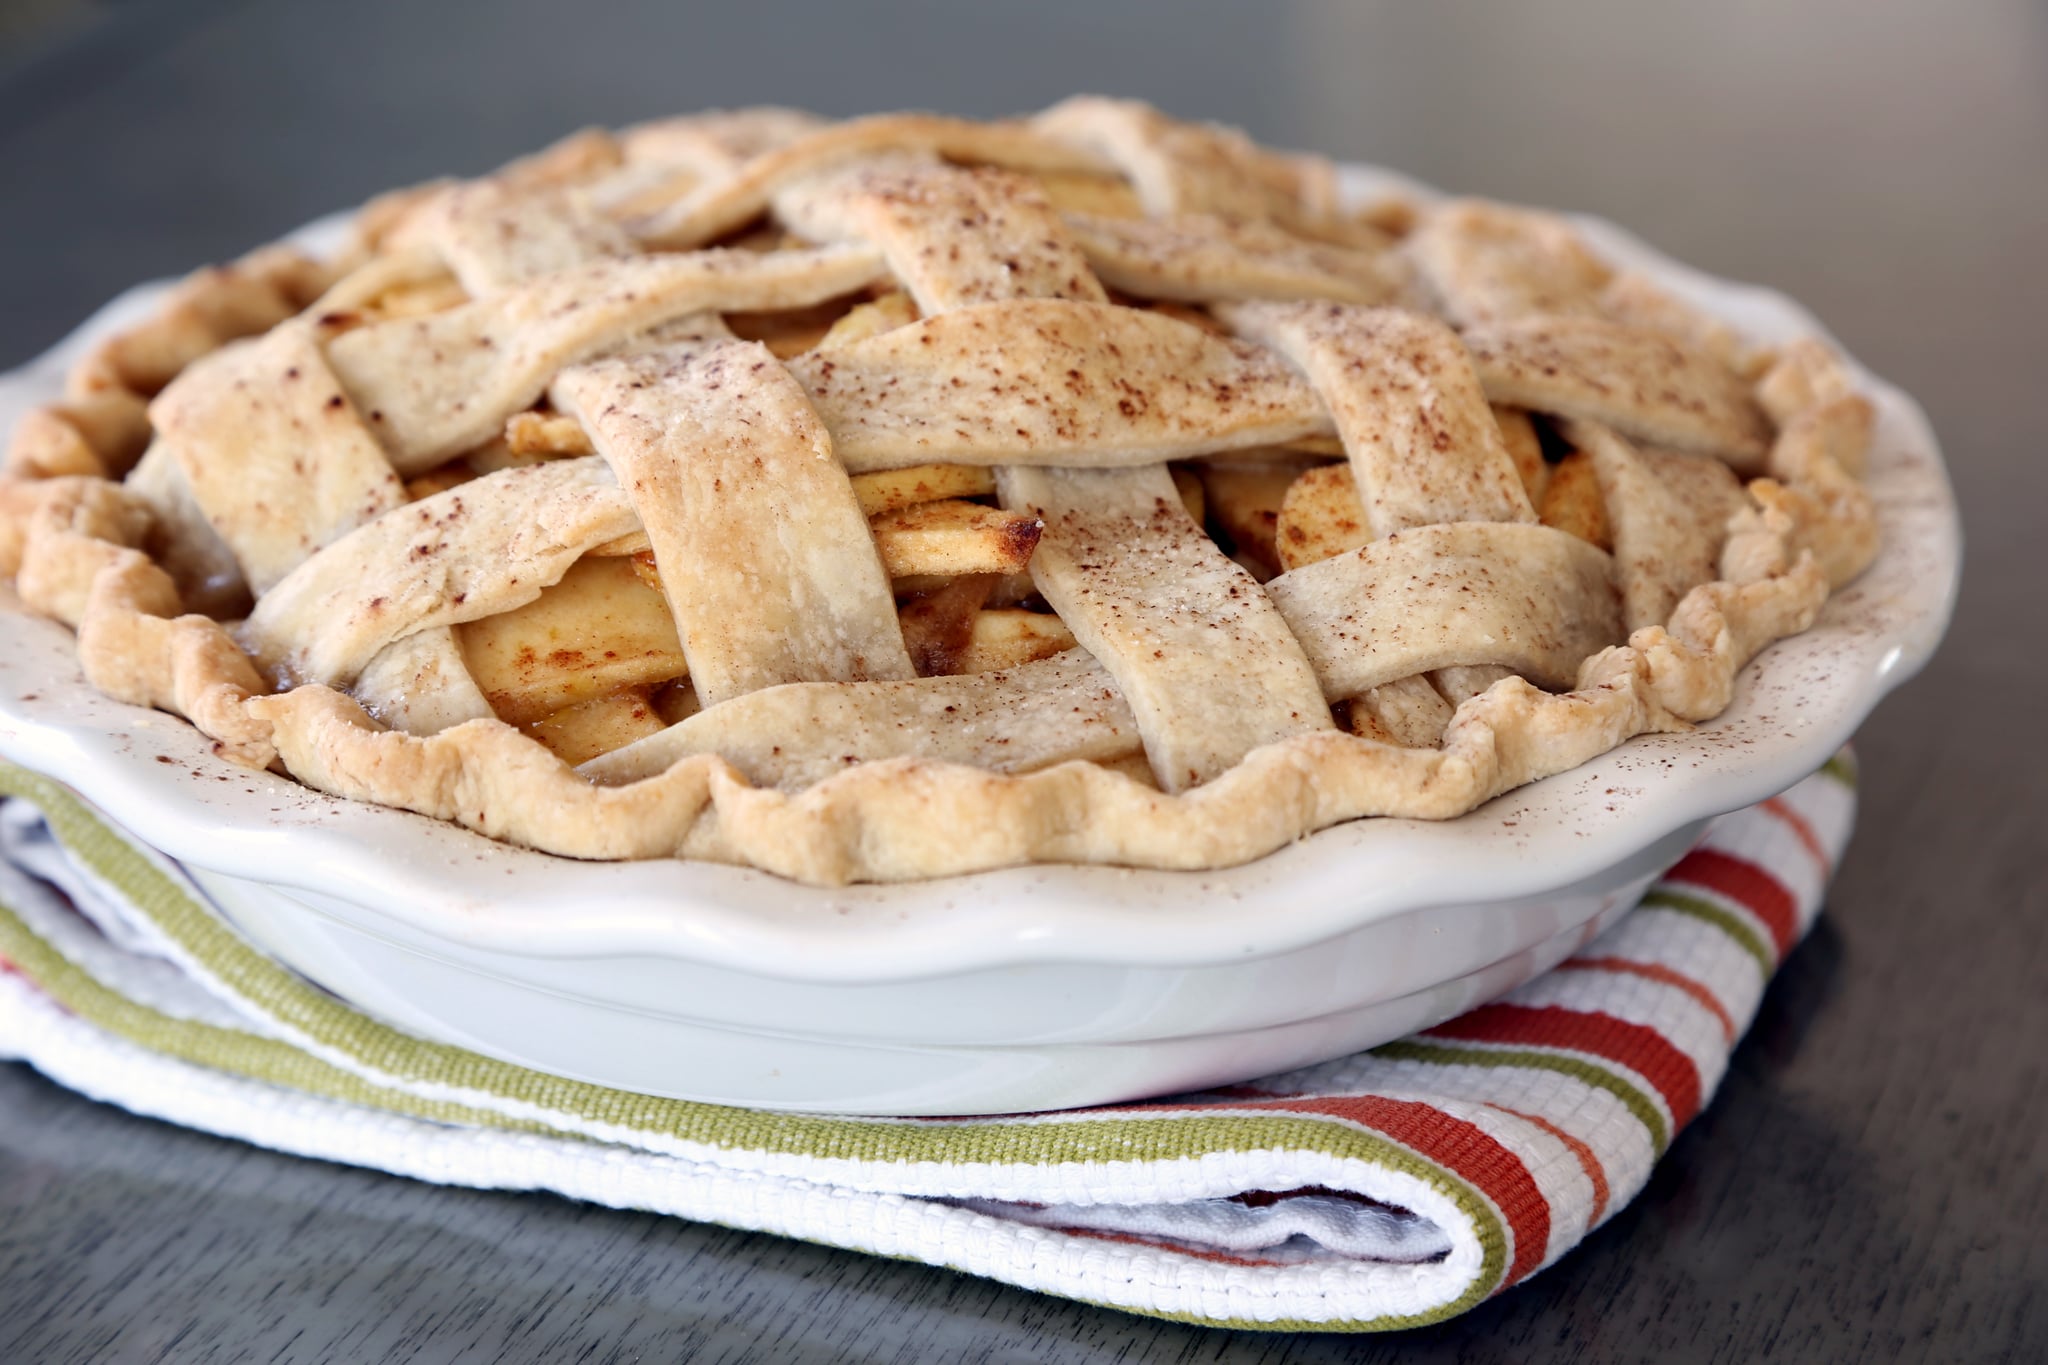 No One Can Resist a Slice of This Apple Pie